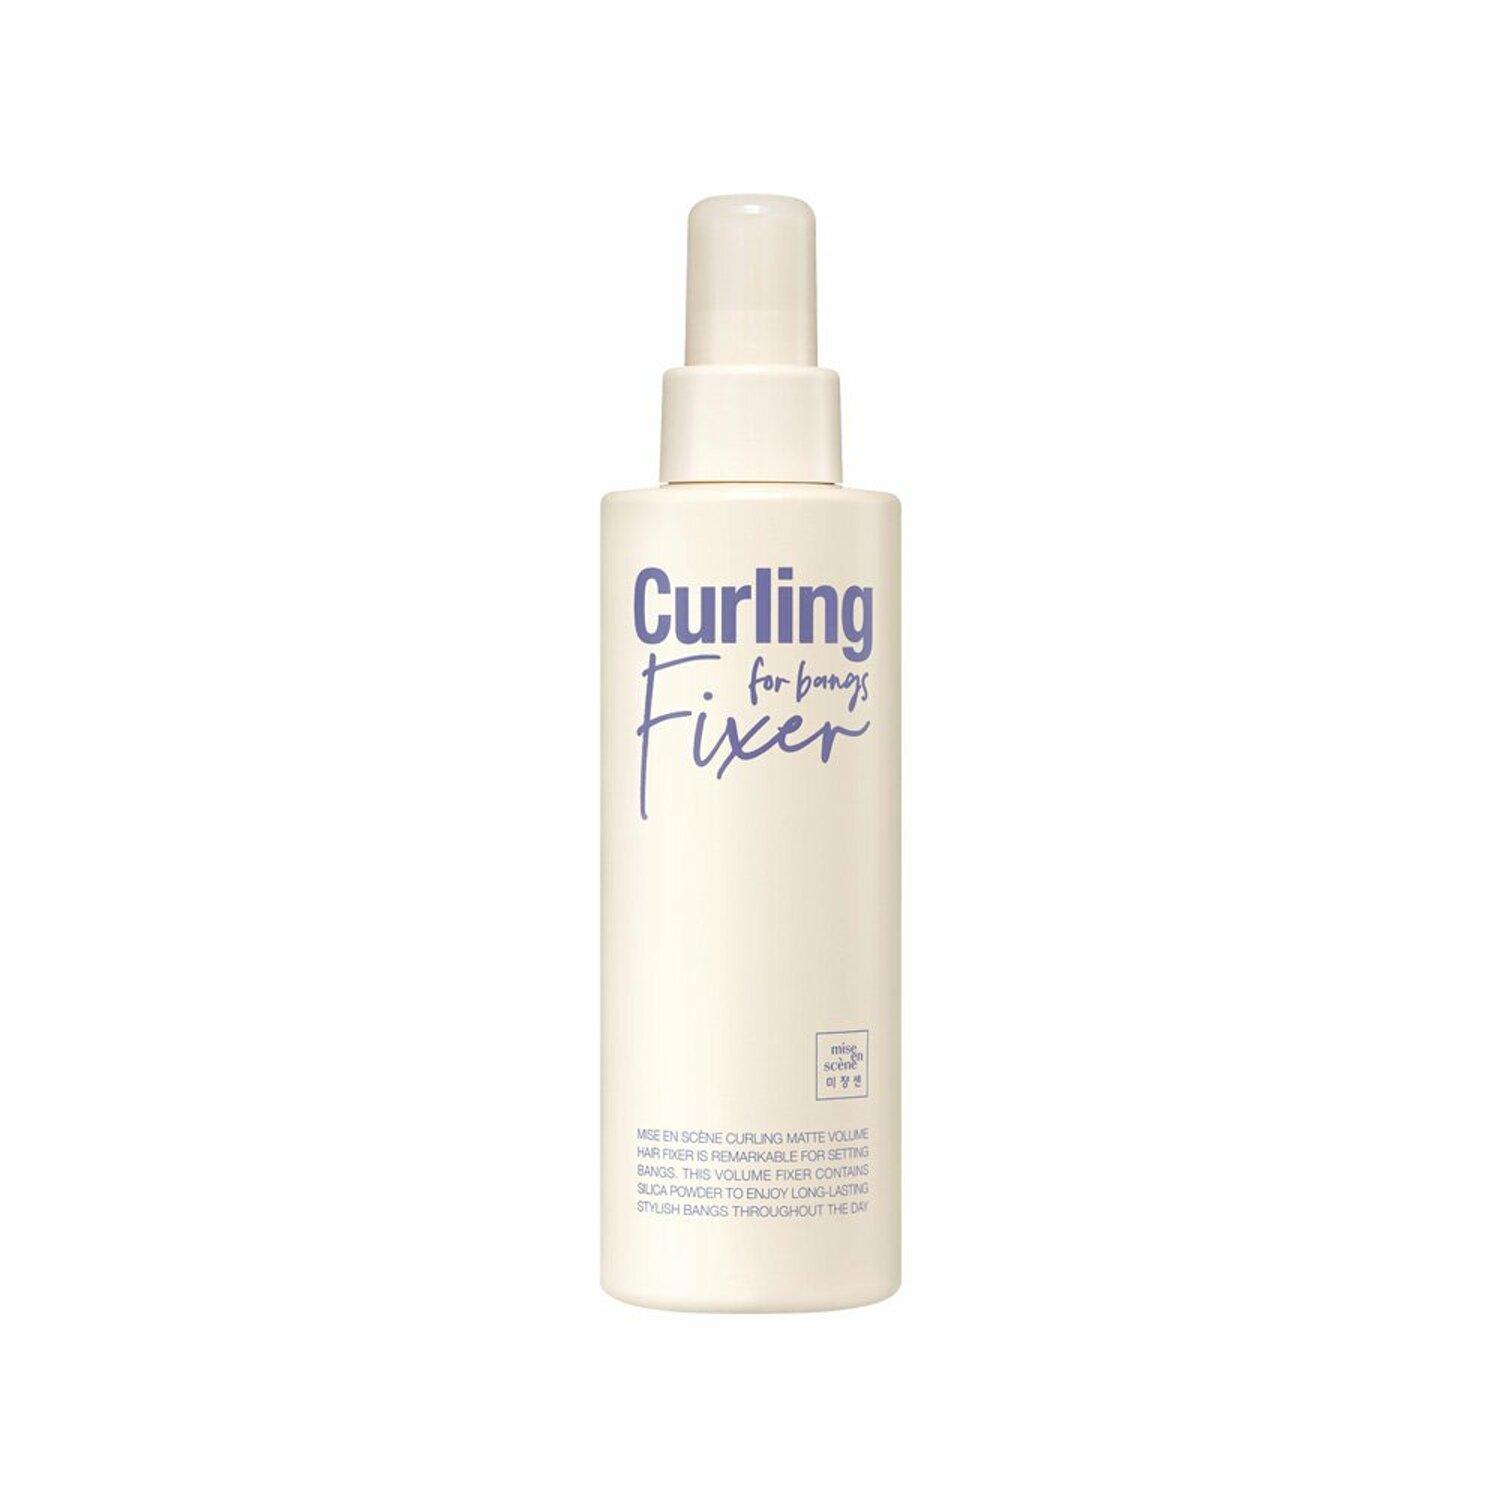 Curling for Bangs Fixer